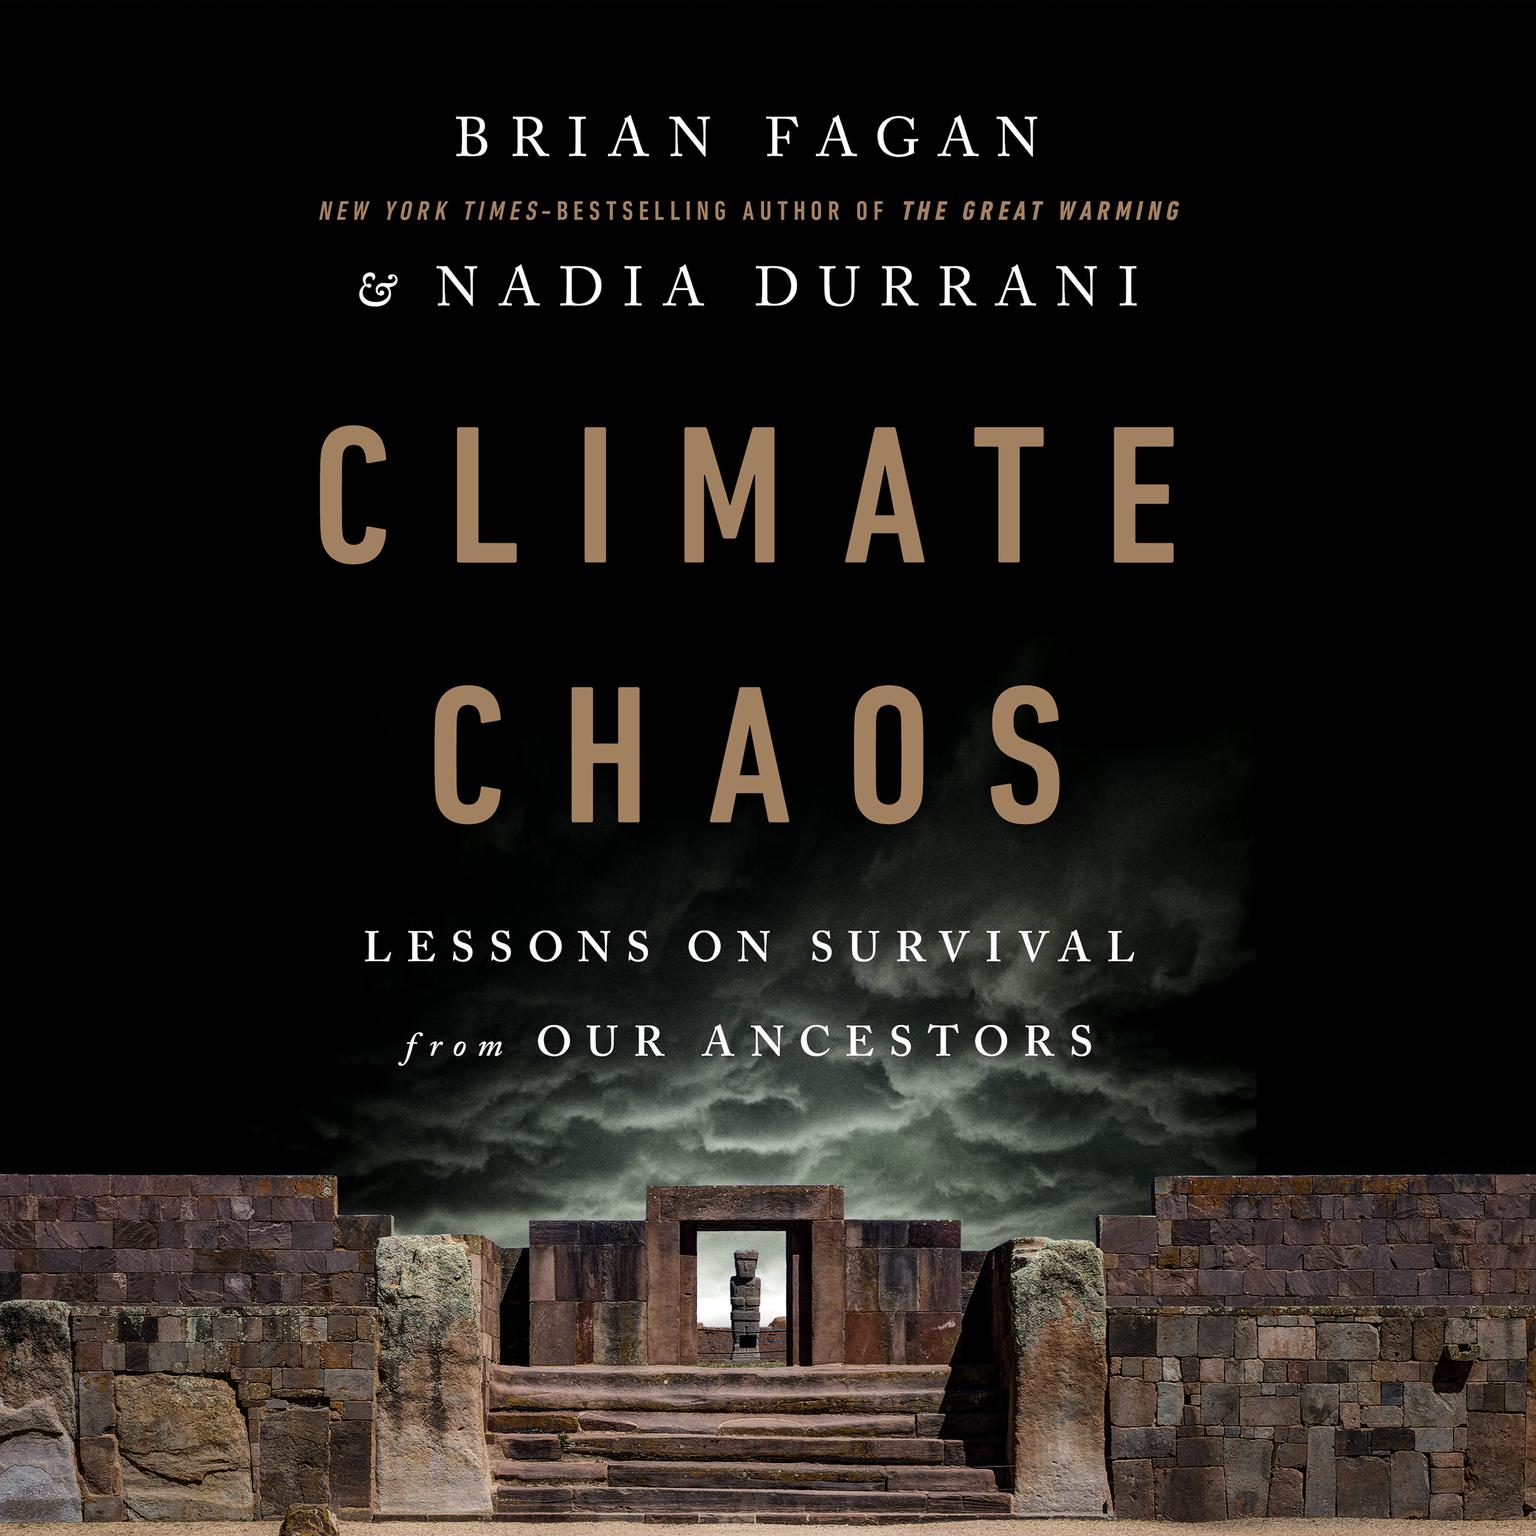 Climate Chaos: Lessons on Survival from Our Ancestors Audiobook, by Brian Fagan